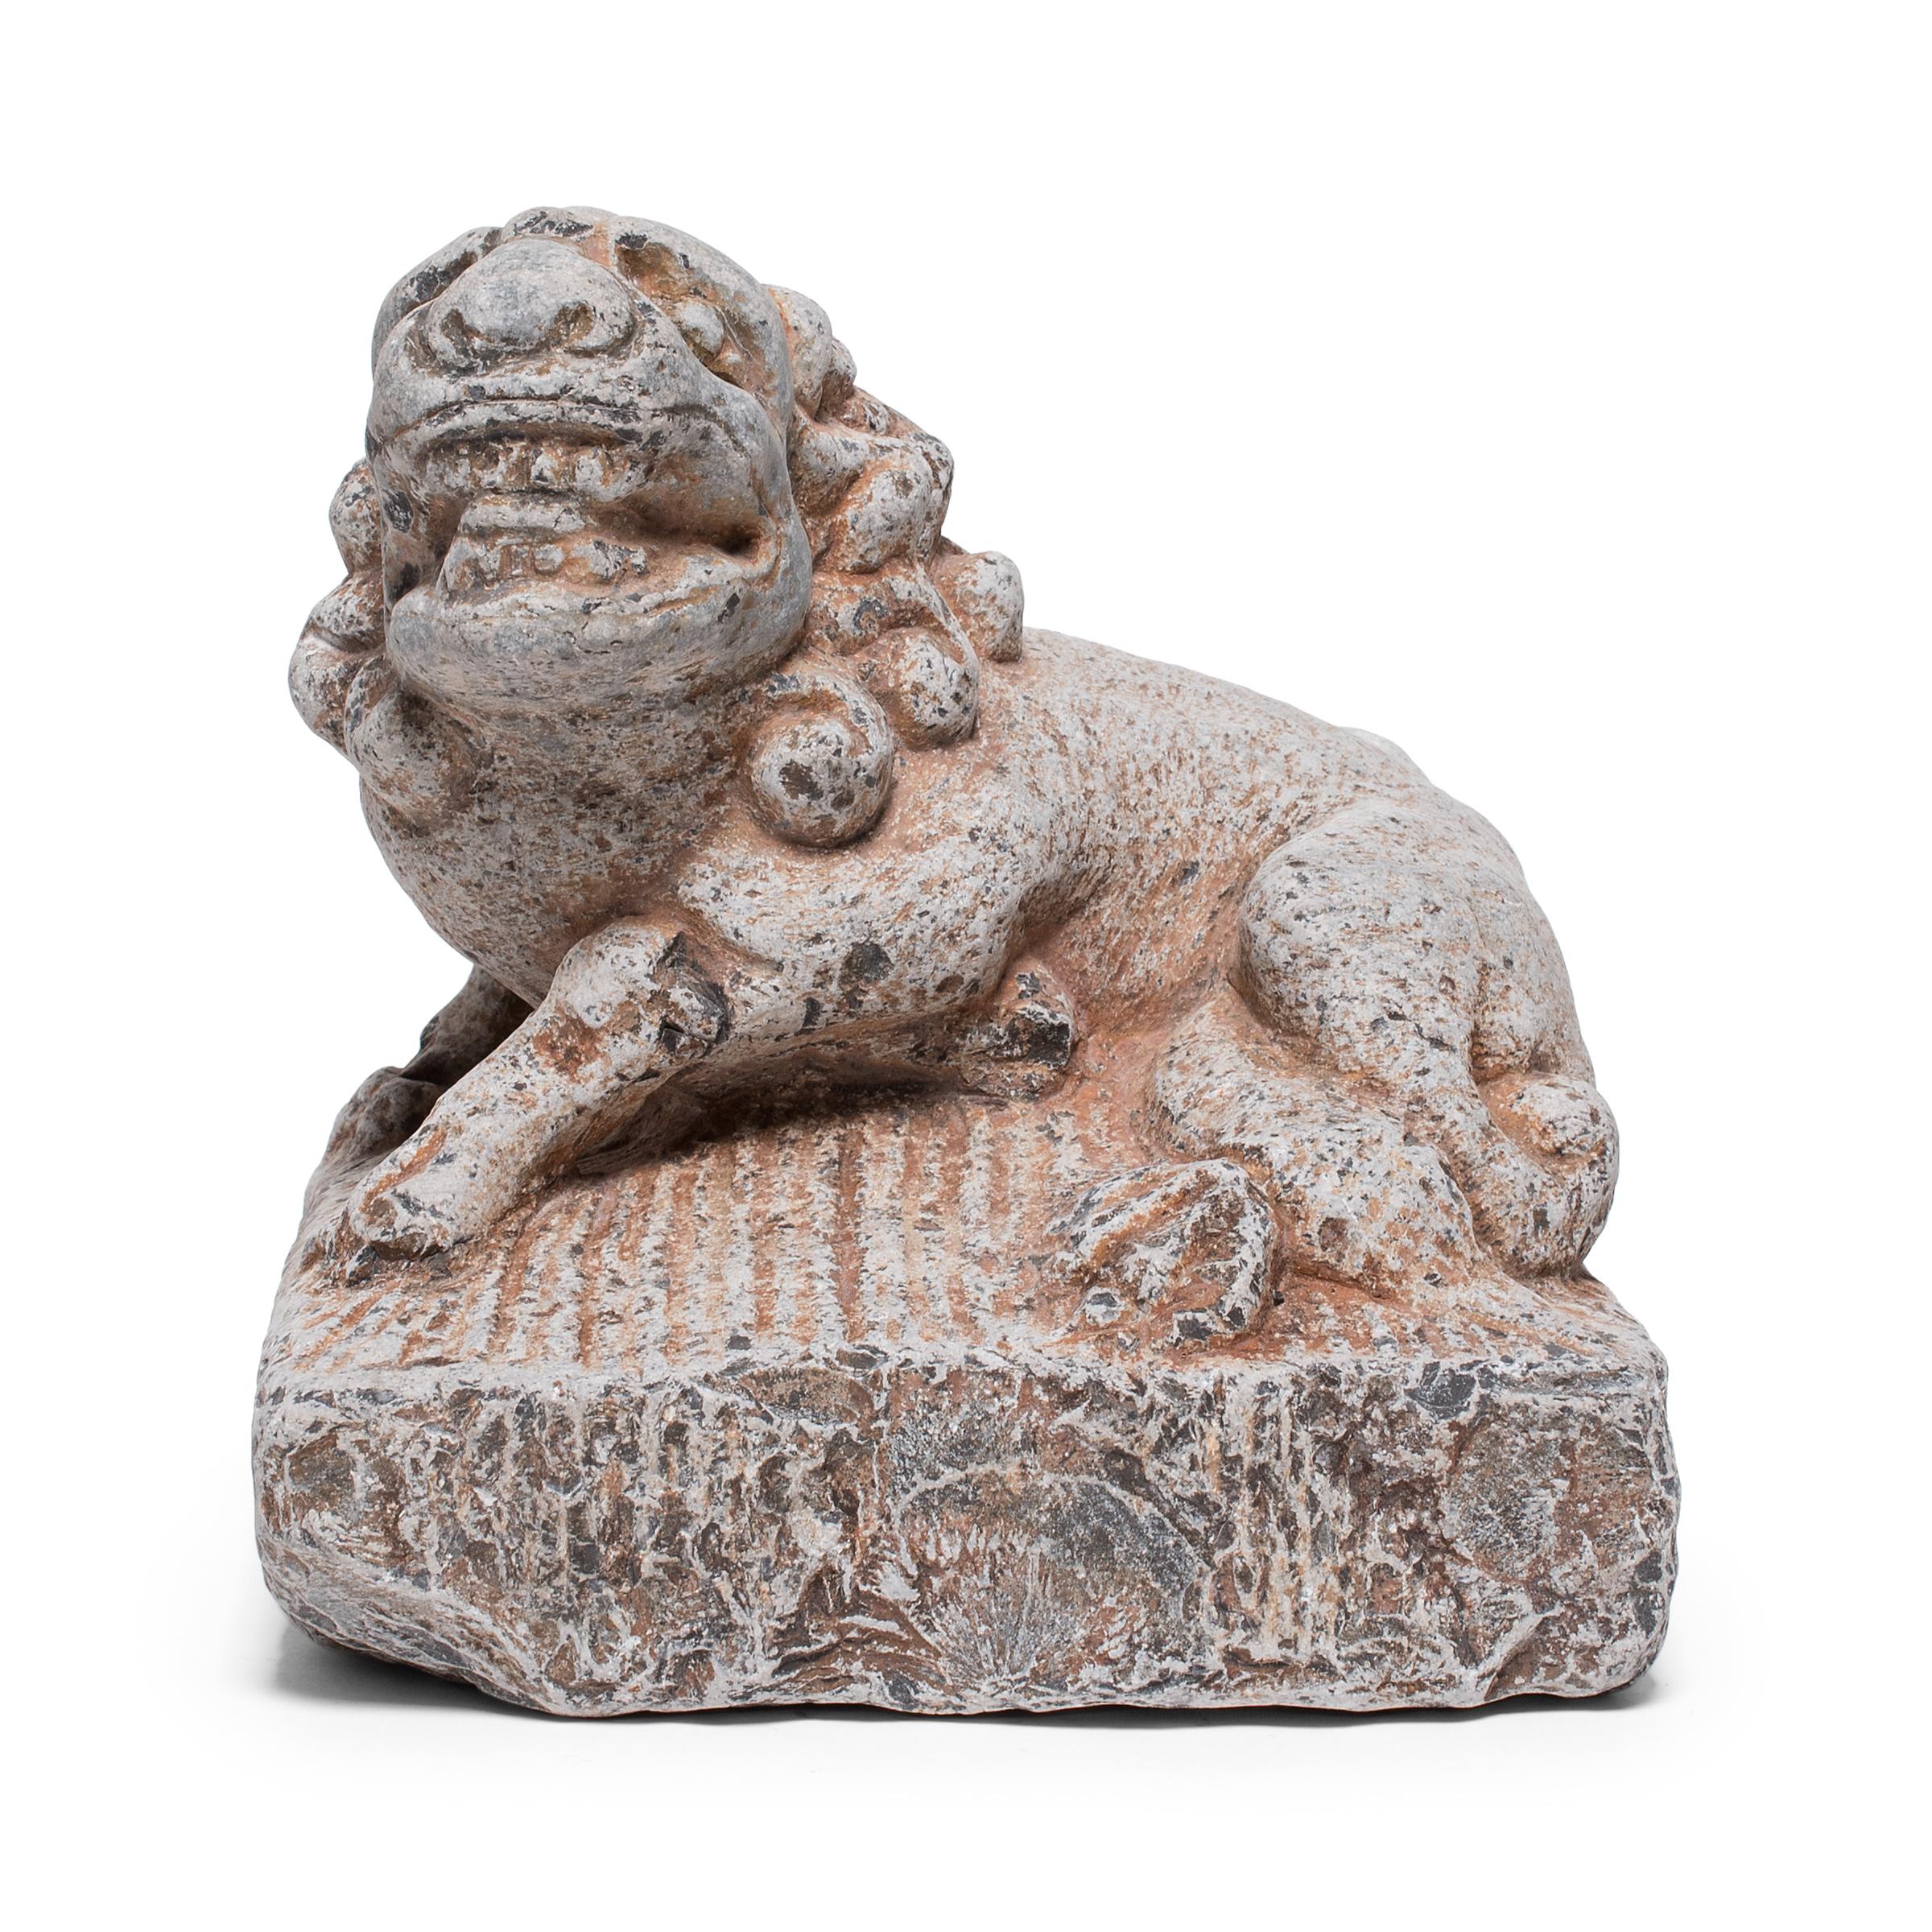 Hand-carved from a single block of limestone, this stone sculpture depicts a reclining mythical fu dog lion. Also known as shizi, fu lions such as this were traditionally placed beside the entrance or threshold of a grand home or sacred space. Set